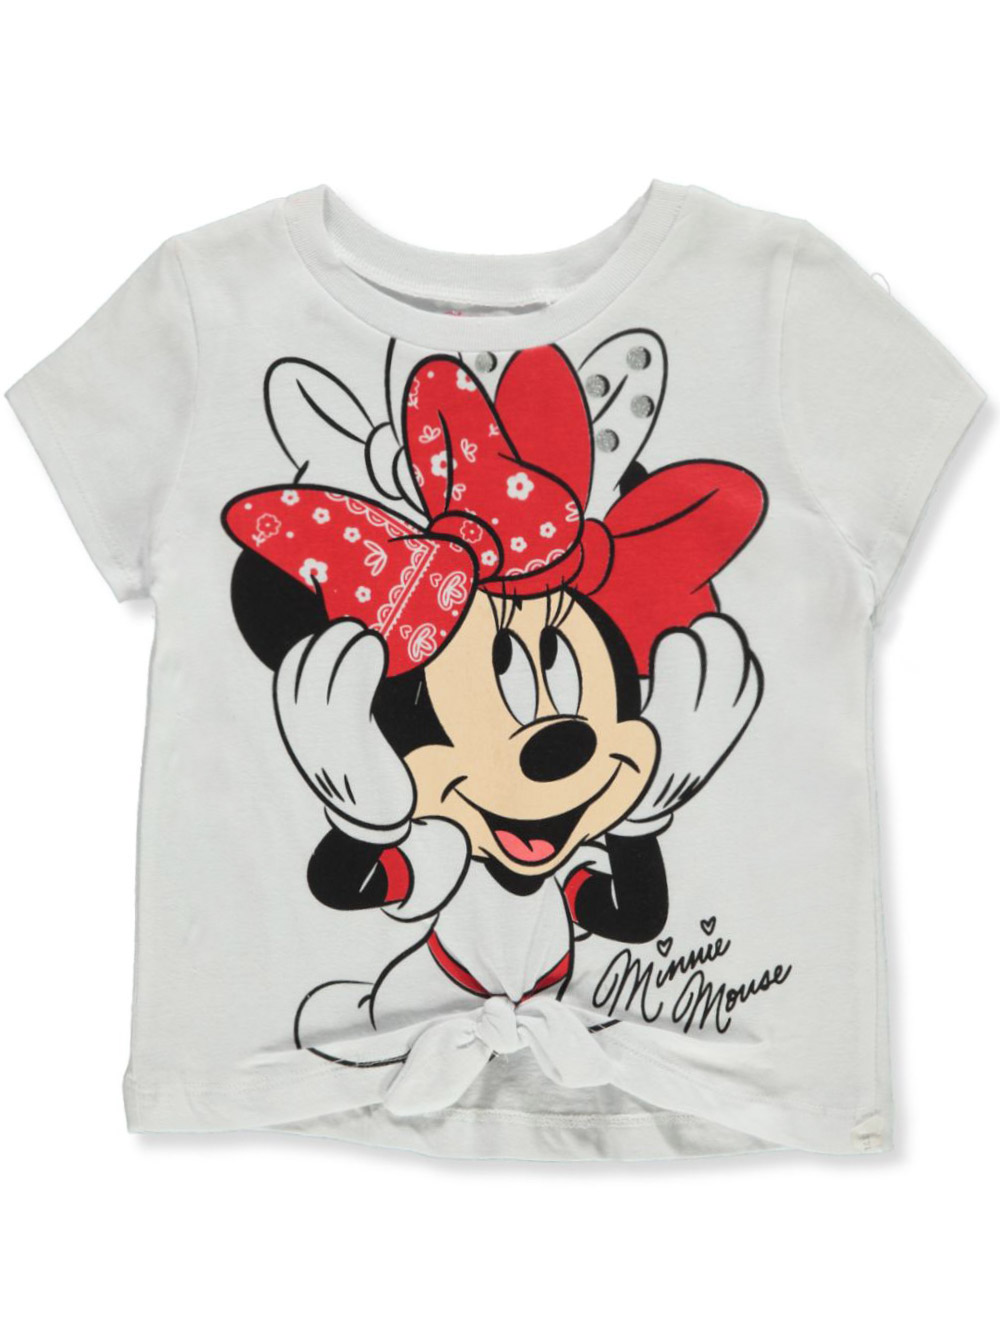 Disney Minnie Mouse Girls' 2-Piece Blush Shorts Set Outfit - white/multi, 4t (Toddler) - image 3 of 3